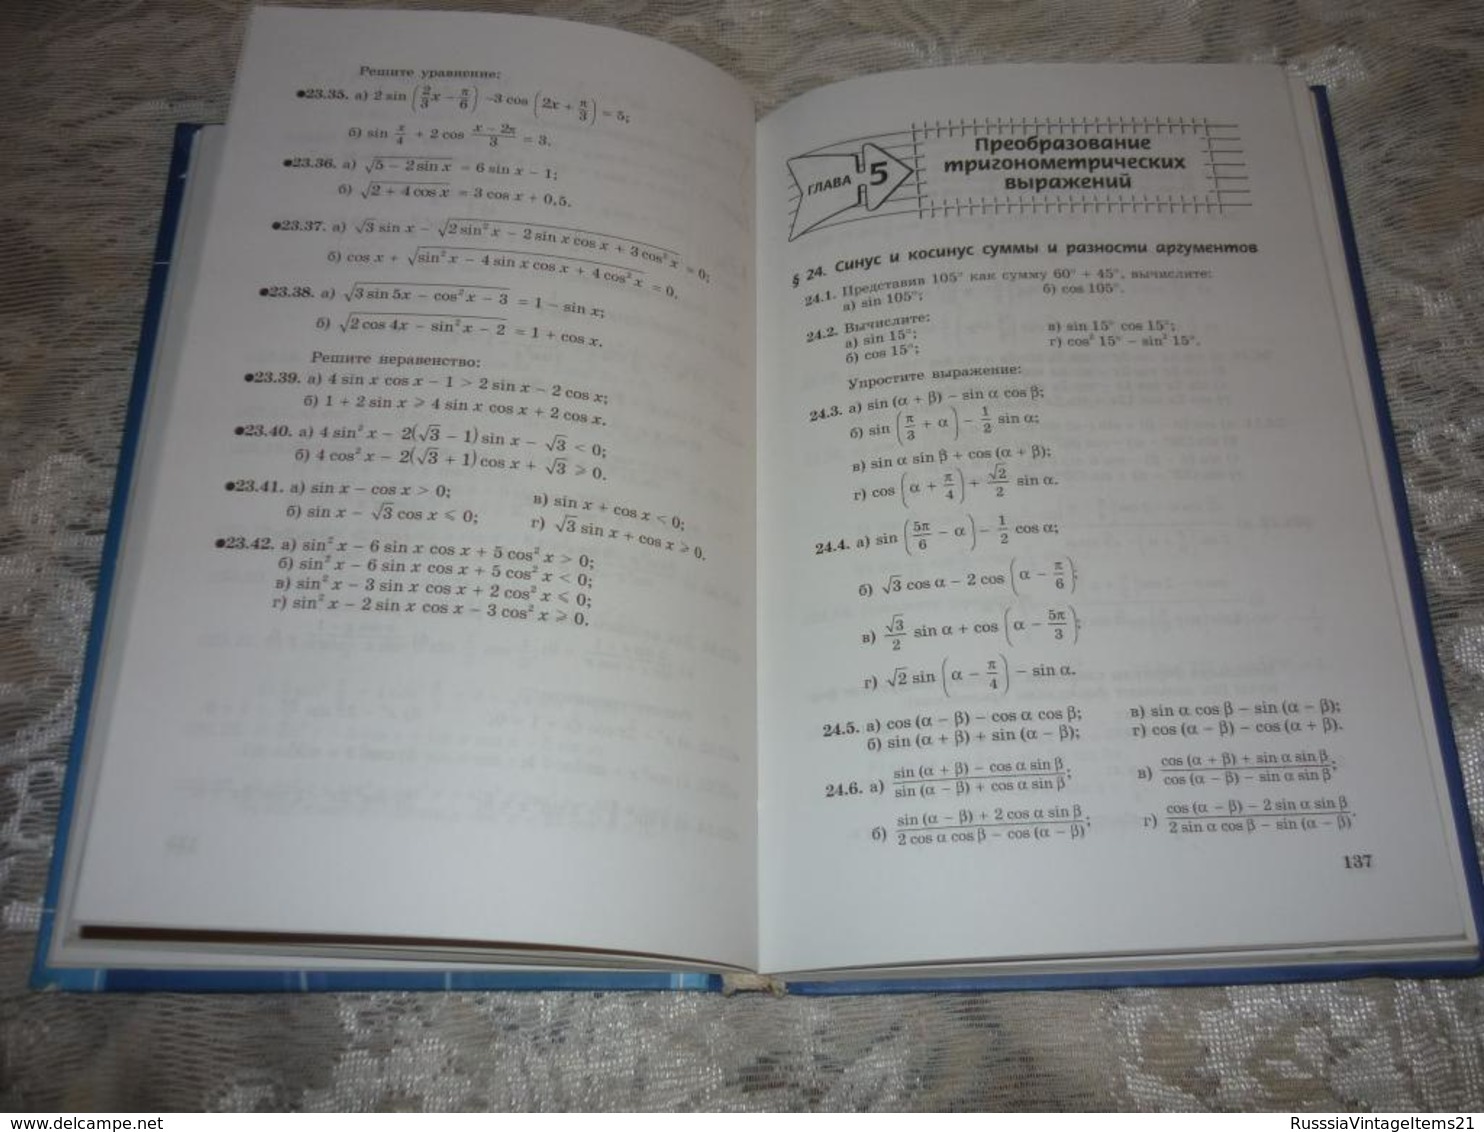 Russian Textbook - In Russian - Textbook From Russia - Mordkovich A. Algebra And The Beginning Of The Analysis. Grade 10 - Slavische Talen